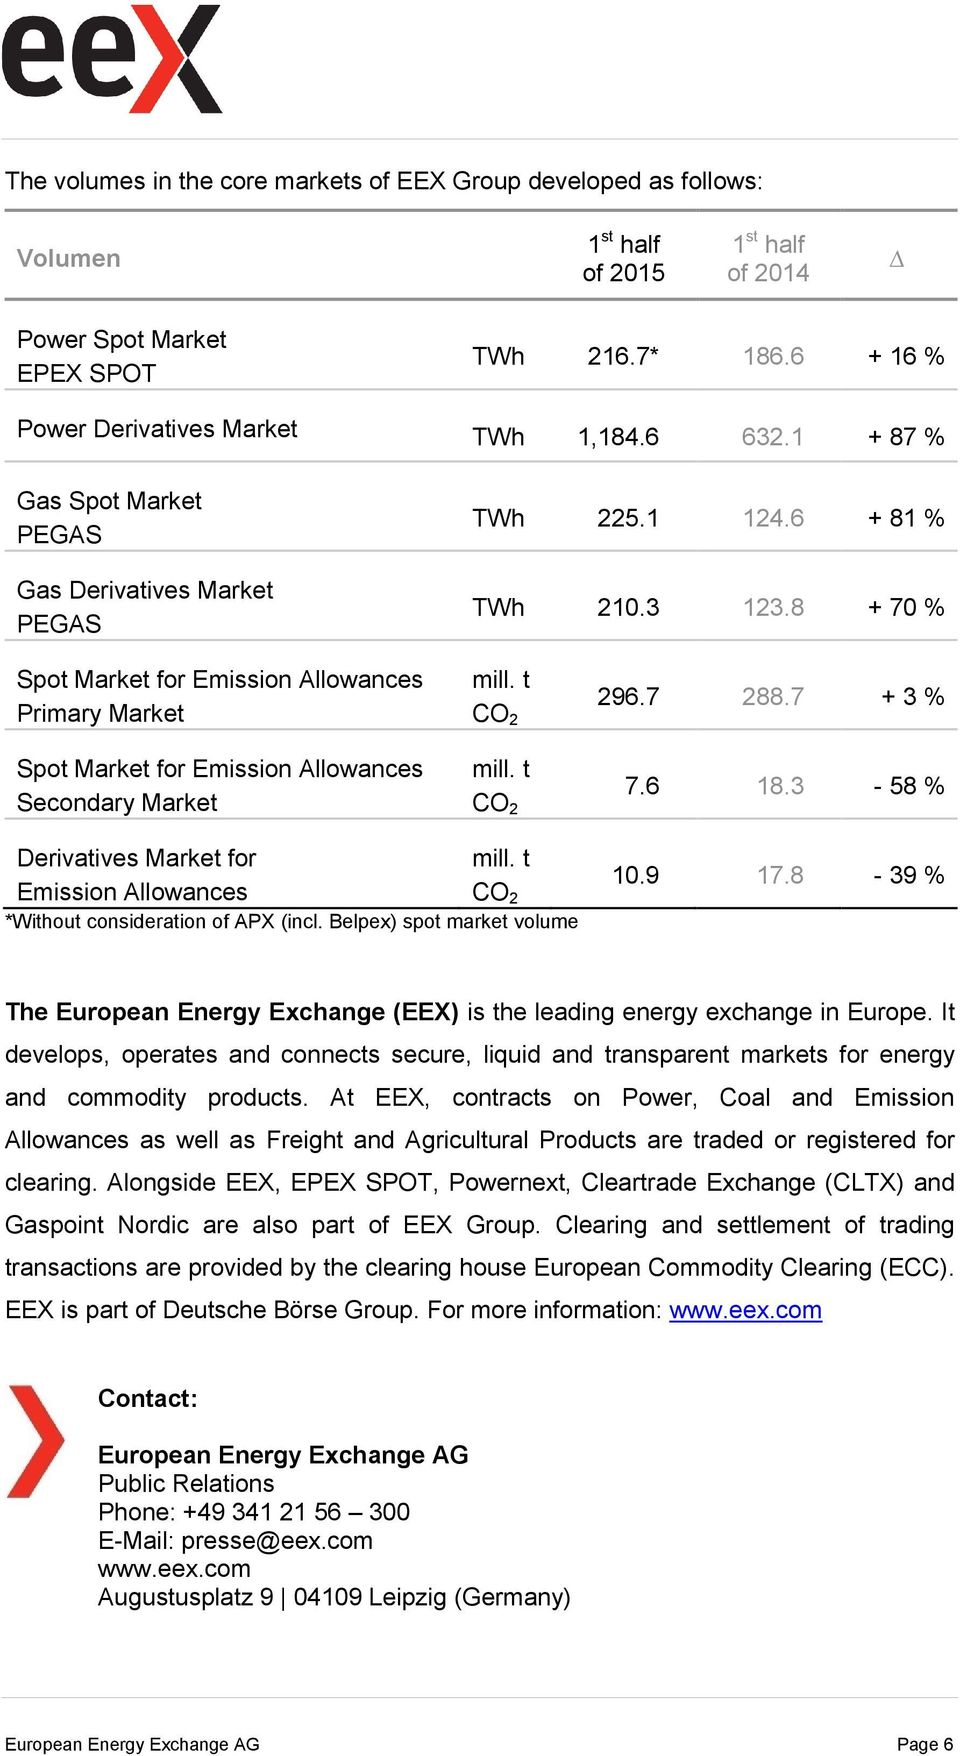 6 + 81 % TWh 210.3 123.8 + 70 % mill. t 296.7 288.7 + 3 % mill. t 7.6 18.3-58 % Derivatives Market for Emission Allowances *Without consideration of APX (incl. Belpex) spot market volume mill. t 10.